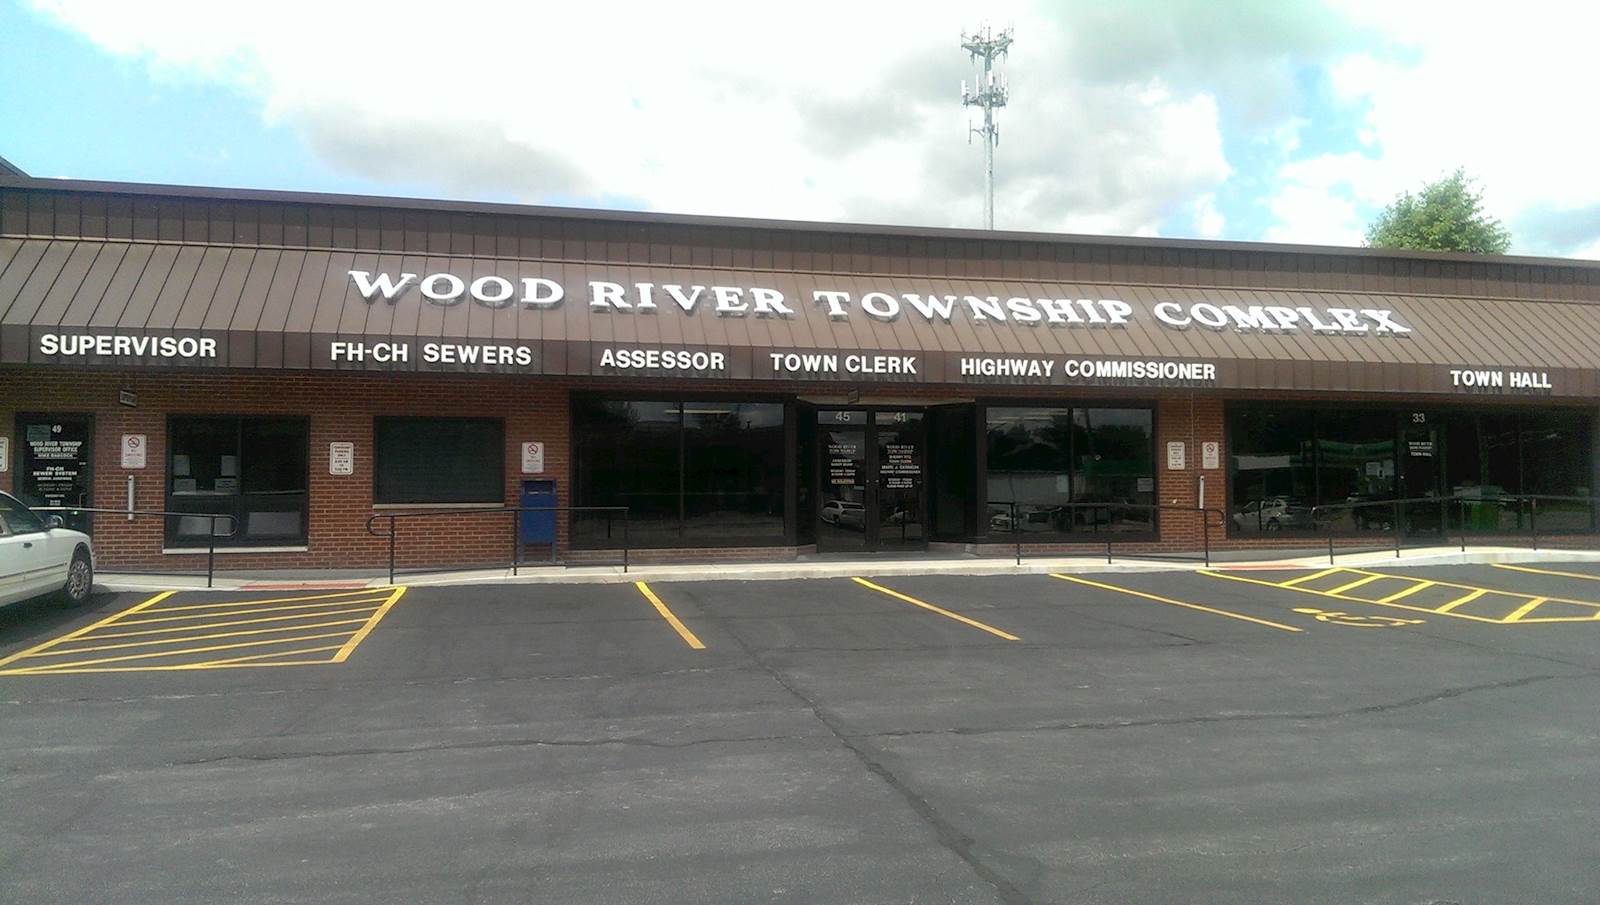 Wood River Township Complex located at 49. S 9th St East Alton, IL 62024